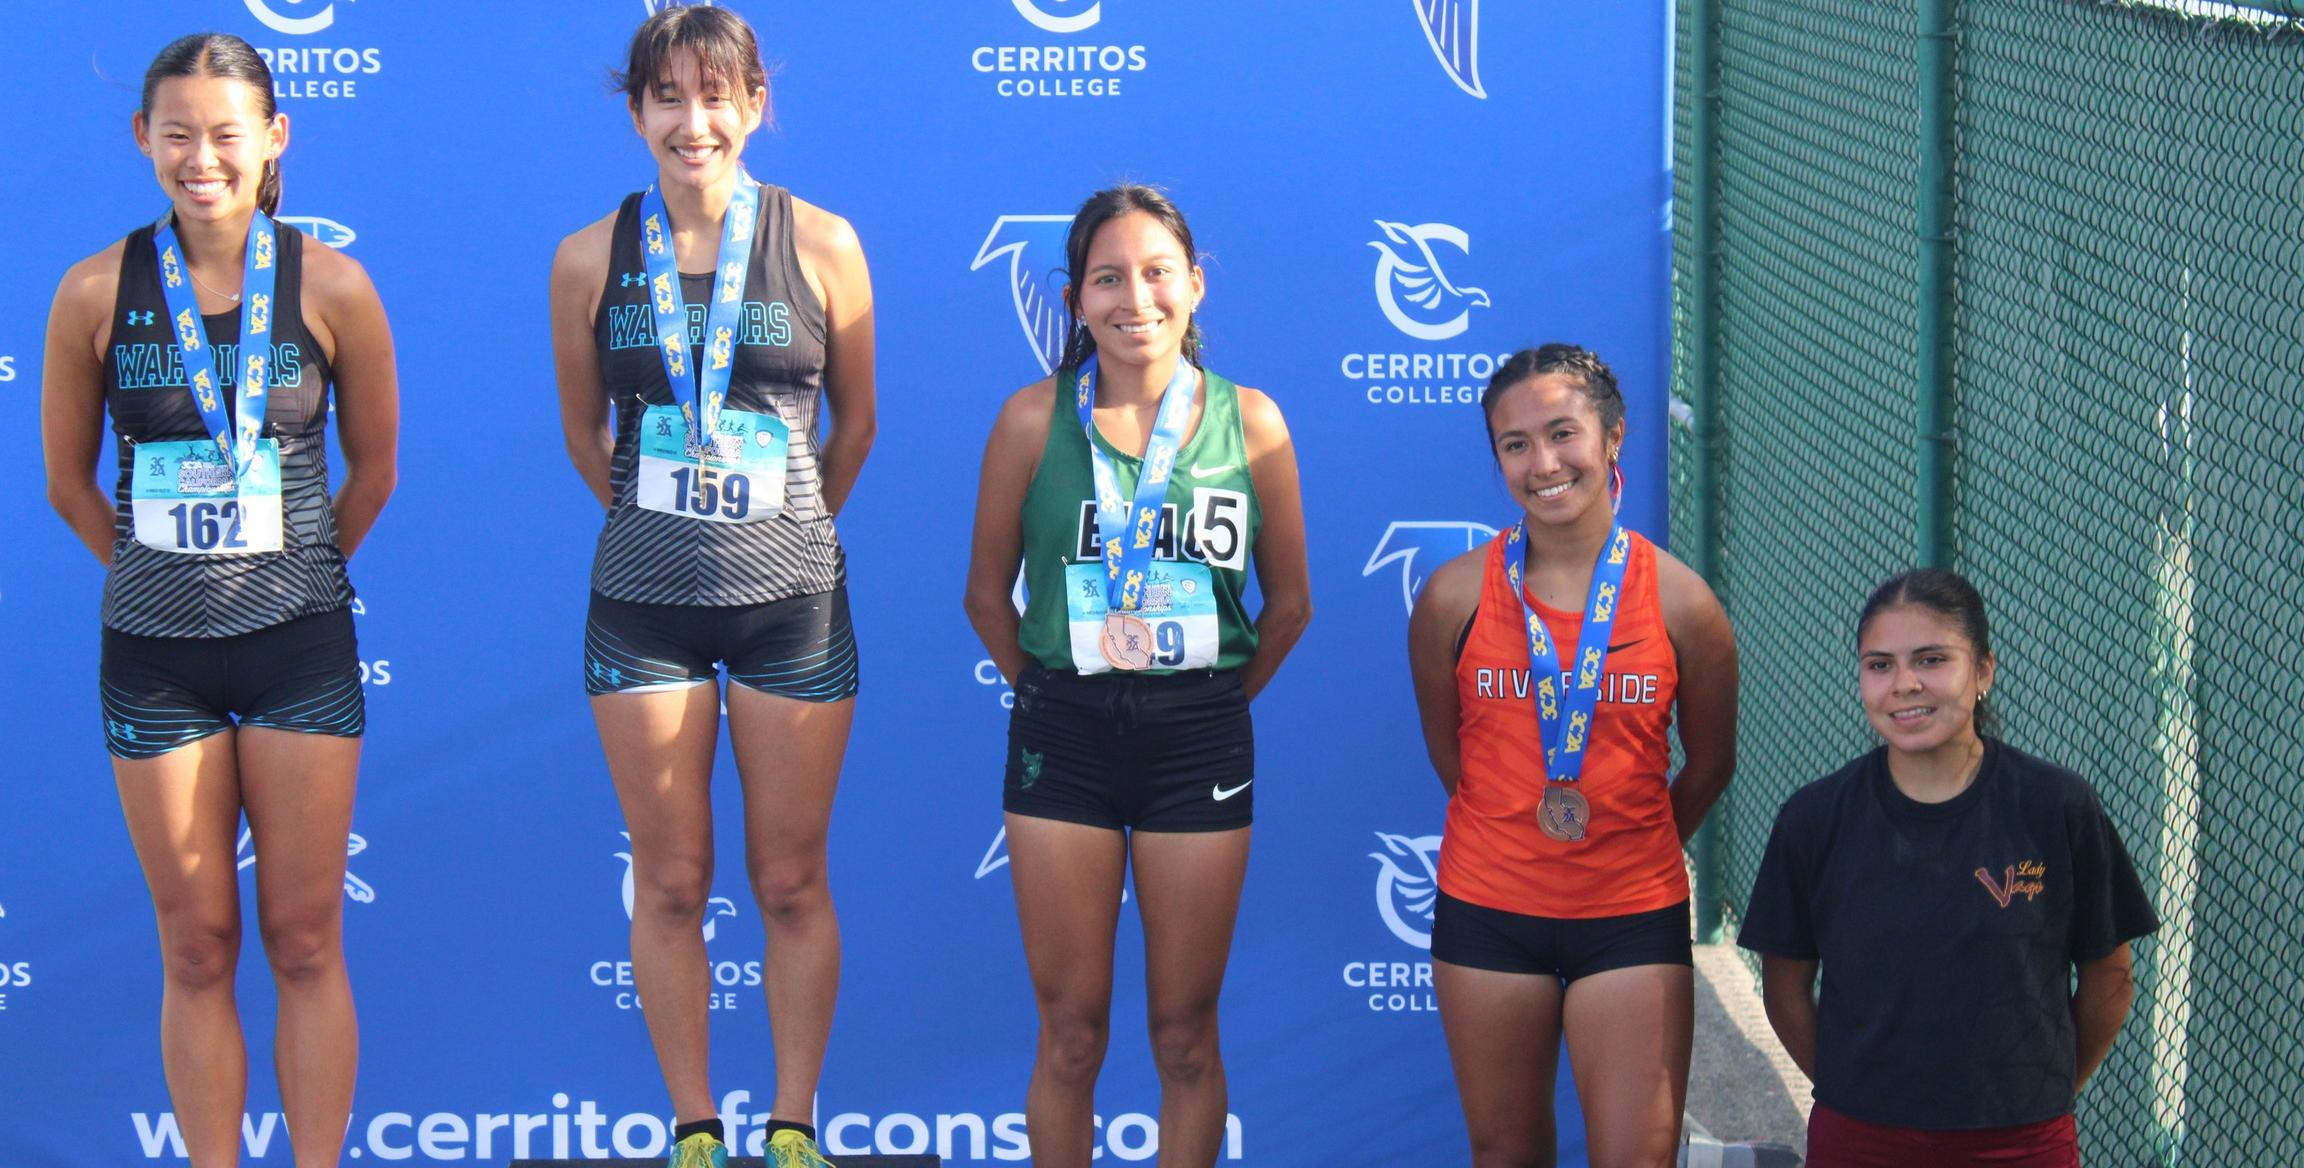 Marbella Flores achieved qualifying times for this weekend's State Championships despite running a tad short of expectations. Coach Browne believes she'll have a little chip on her shoulder as she prepares for Saddleback this Saturday